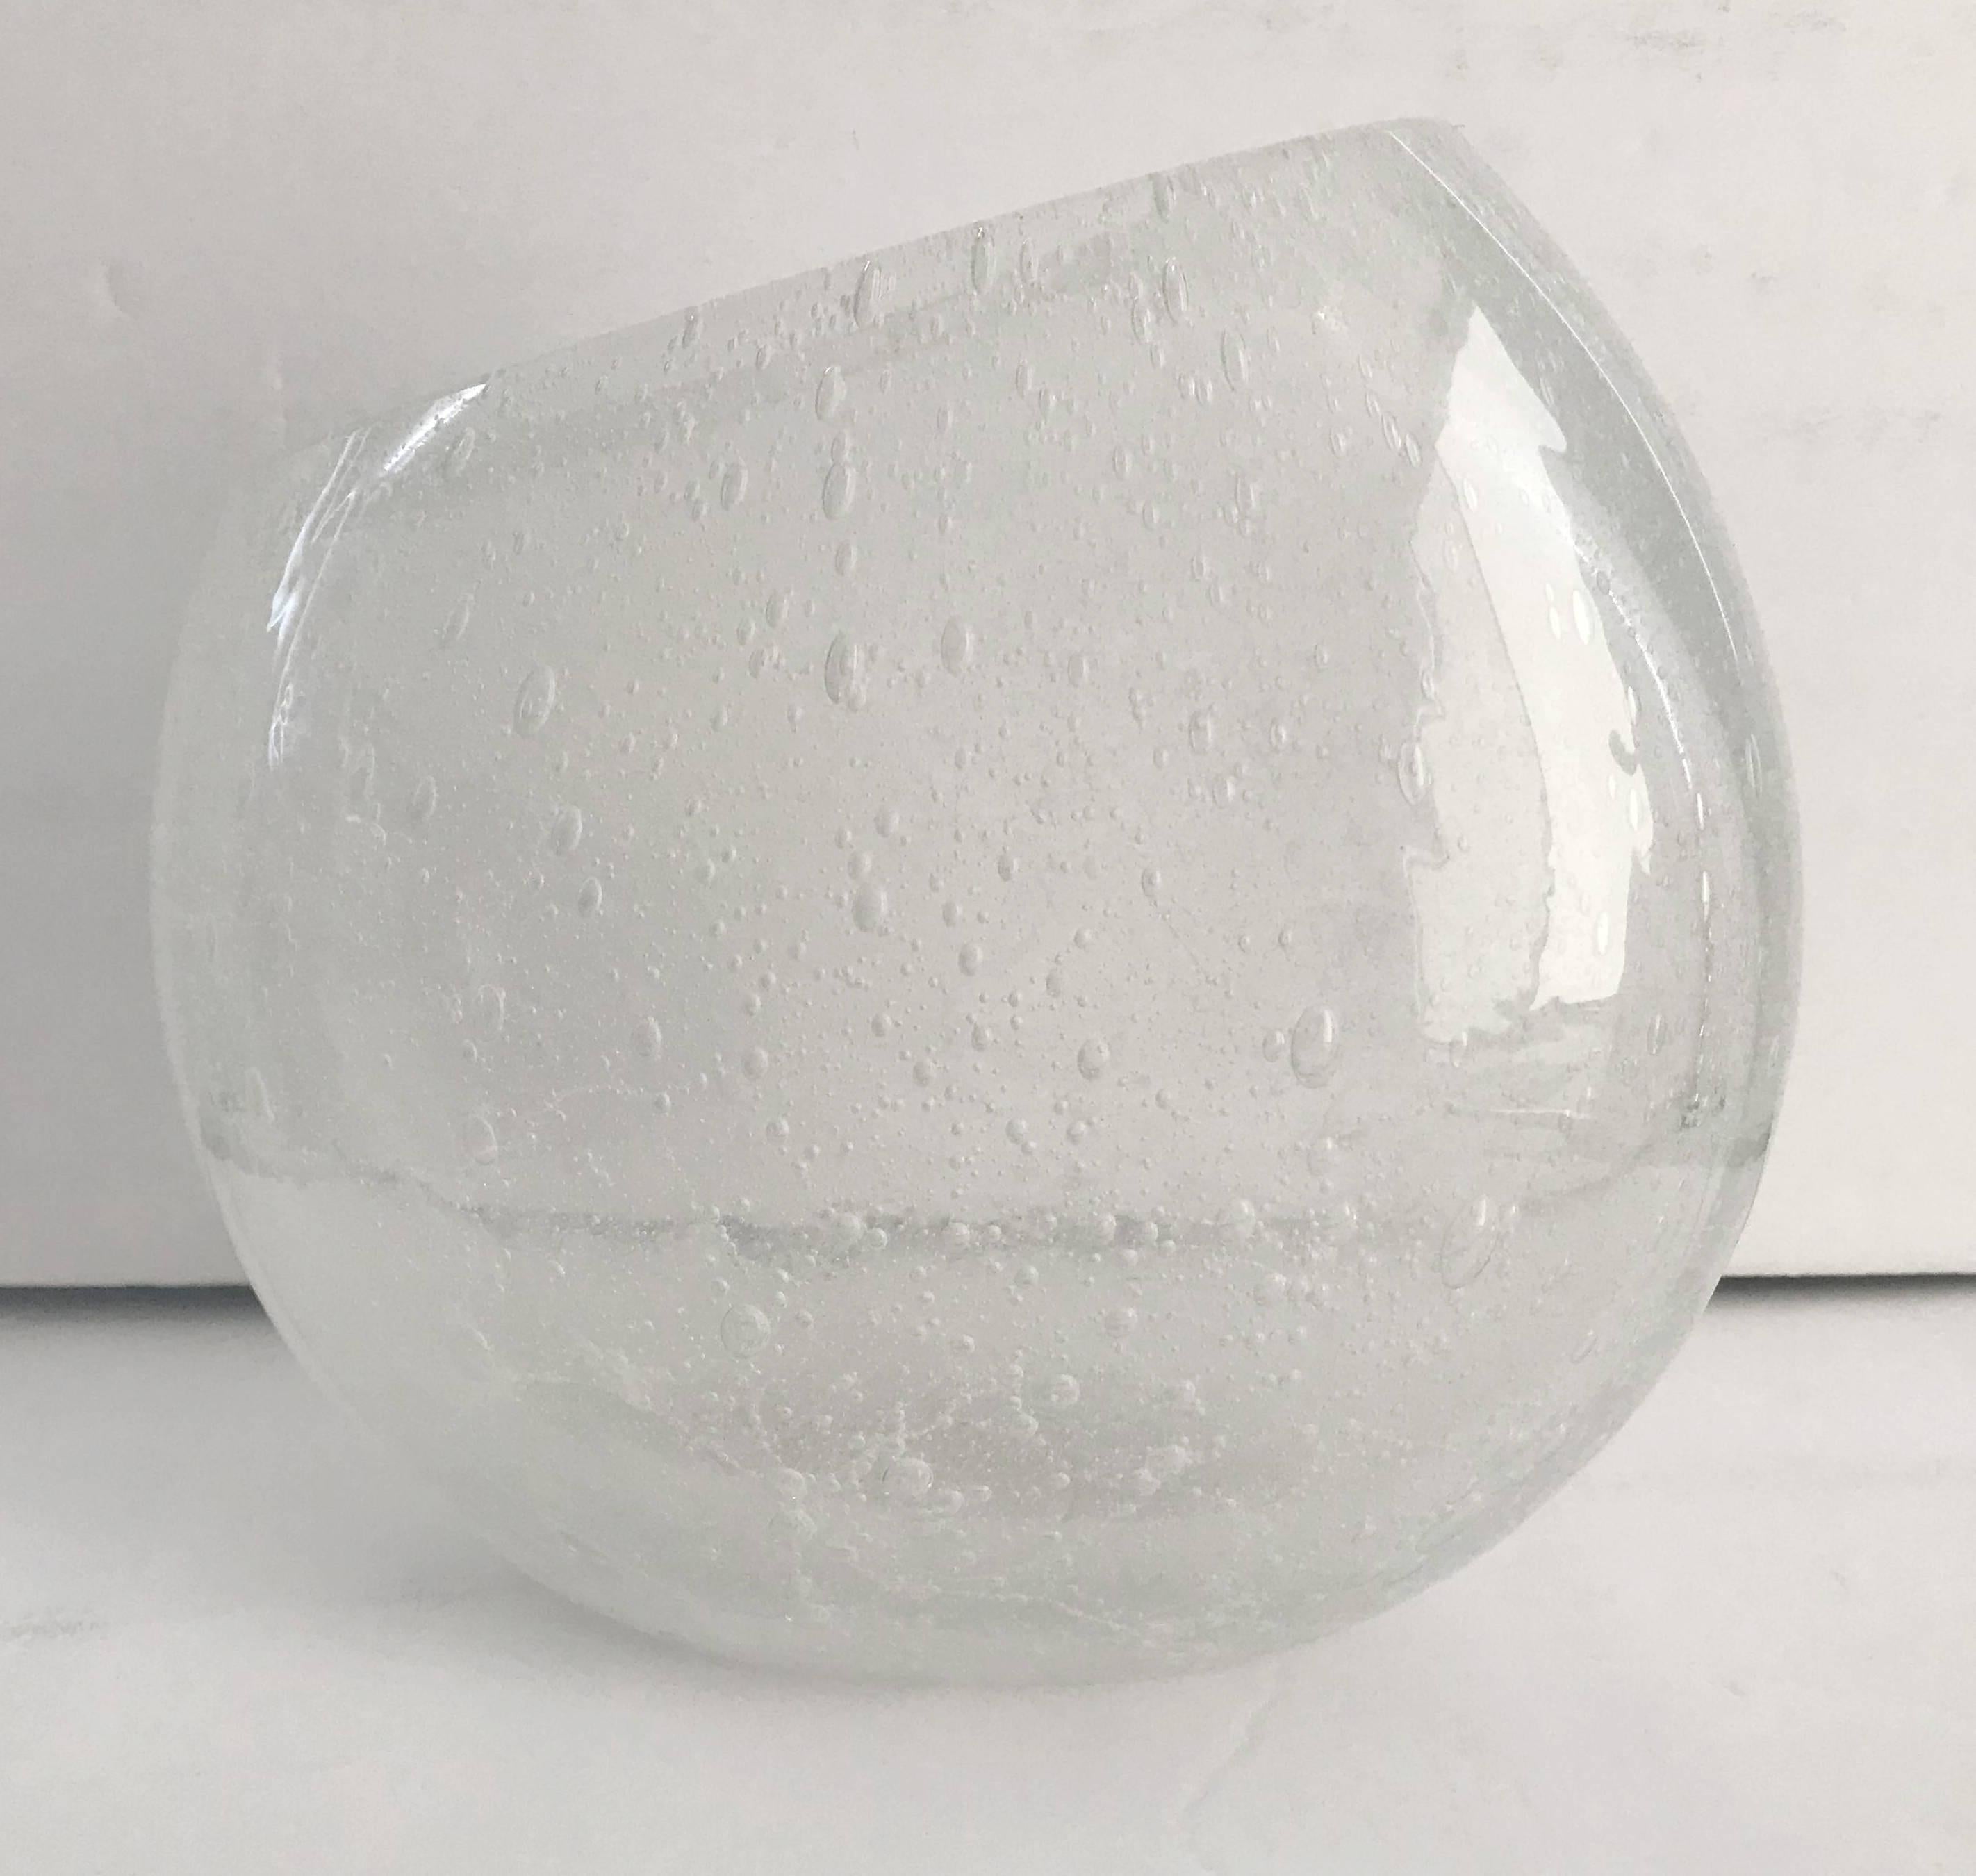 Italian vase or sculpture in thick clear Murano glass hand blown with bubbles within the glass in Pulegoso technique / made in Italy by Studio Pino Signoretto, circa 1970s
Signature engraved on the base
Measures: Height 8.5 inches, width 9 inches,